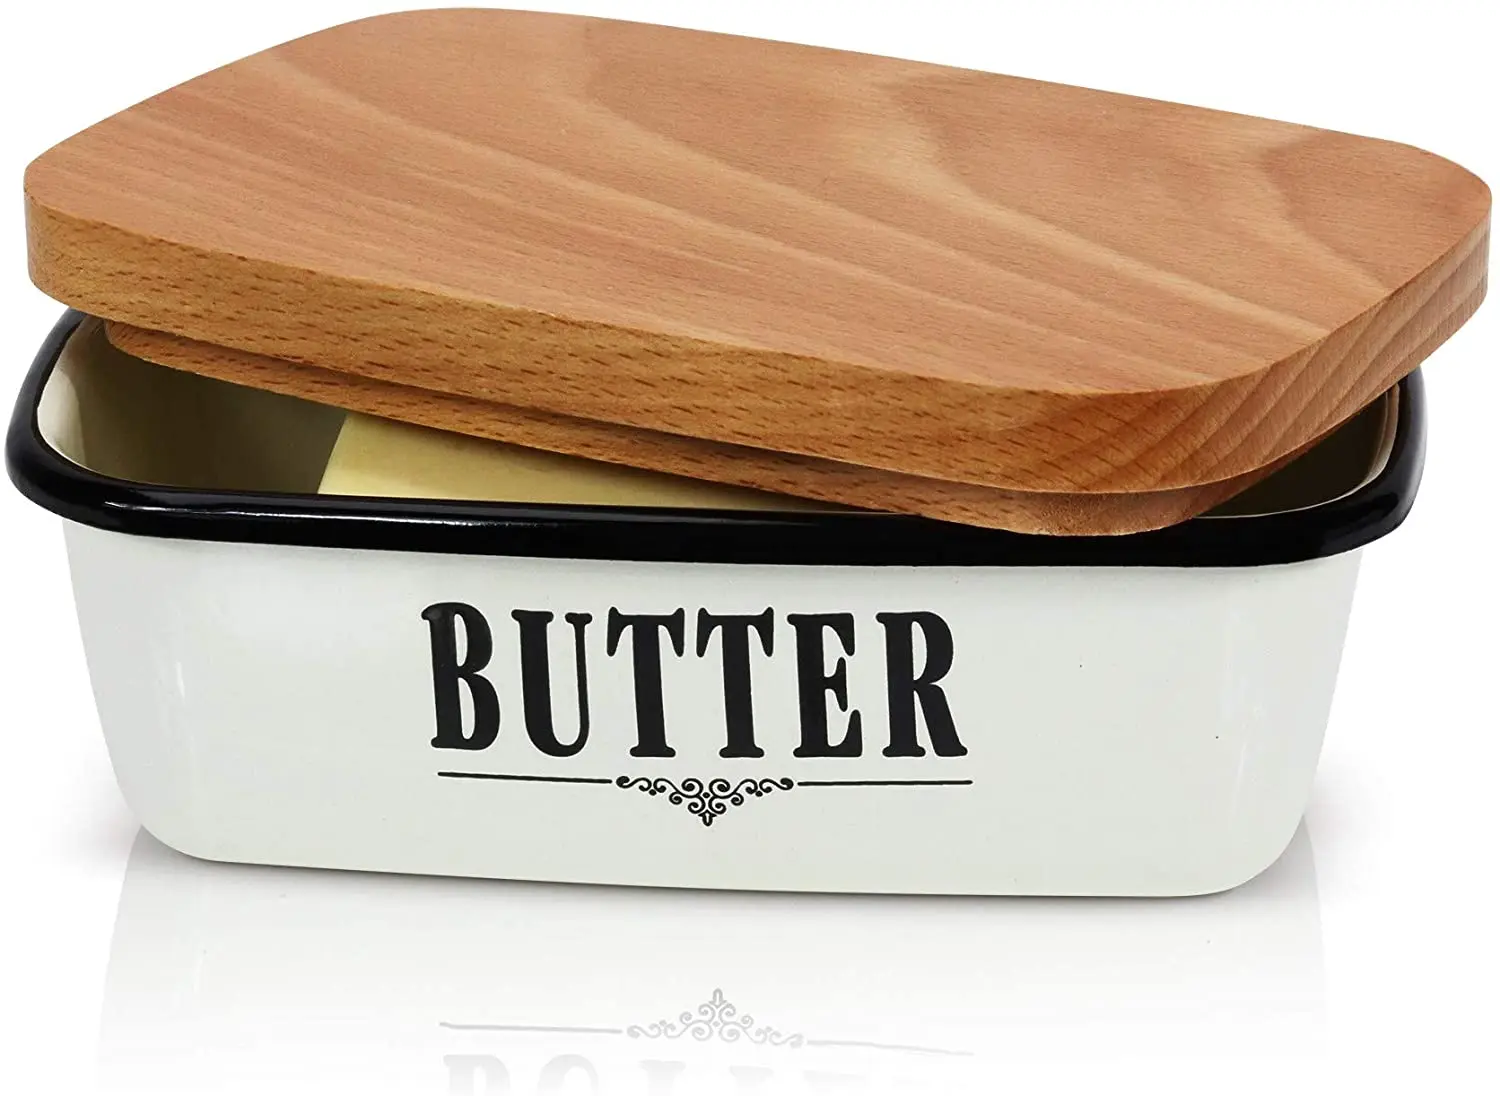 Perfect To Keep Your Butter Soft NEW AND IMPROVED Amy Large Butter Dish Airtight Butter Dishes Imitation Porcelain Container Holds Up to 2 Sticks of Butter with Beech Wooden Lid 